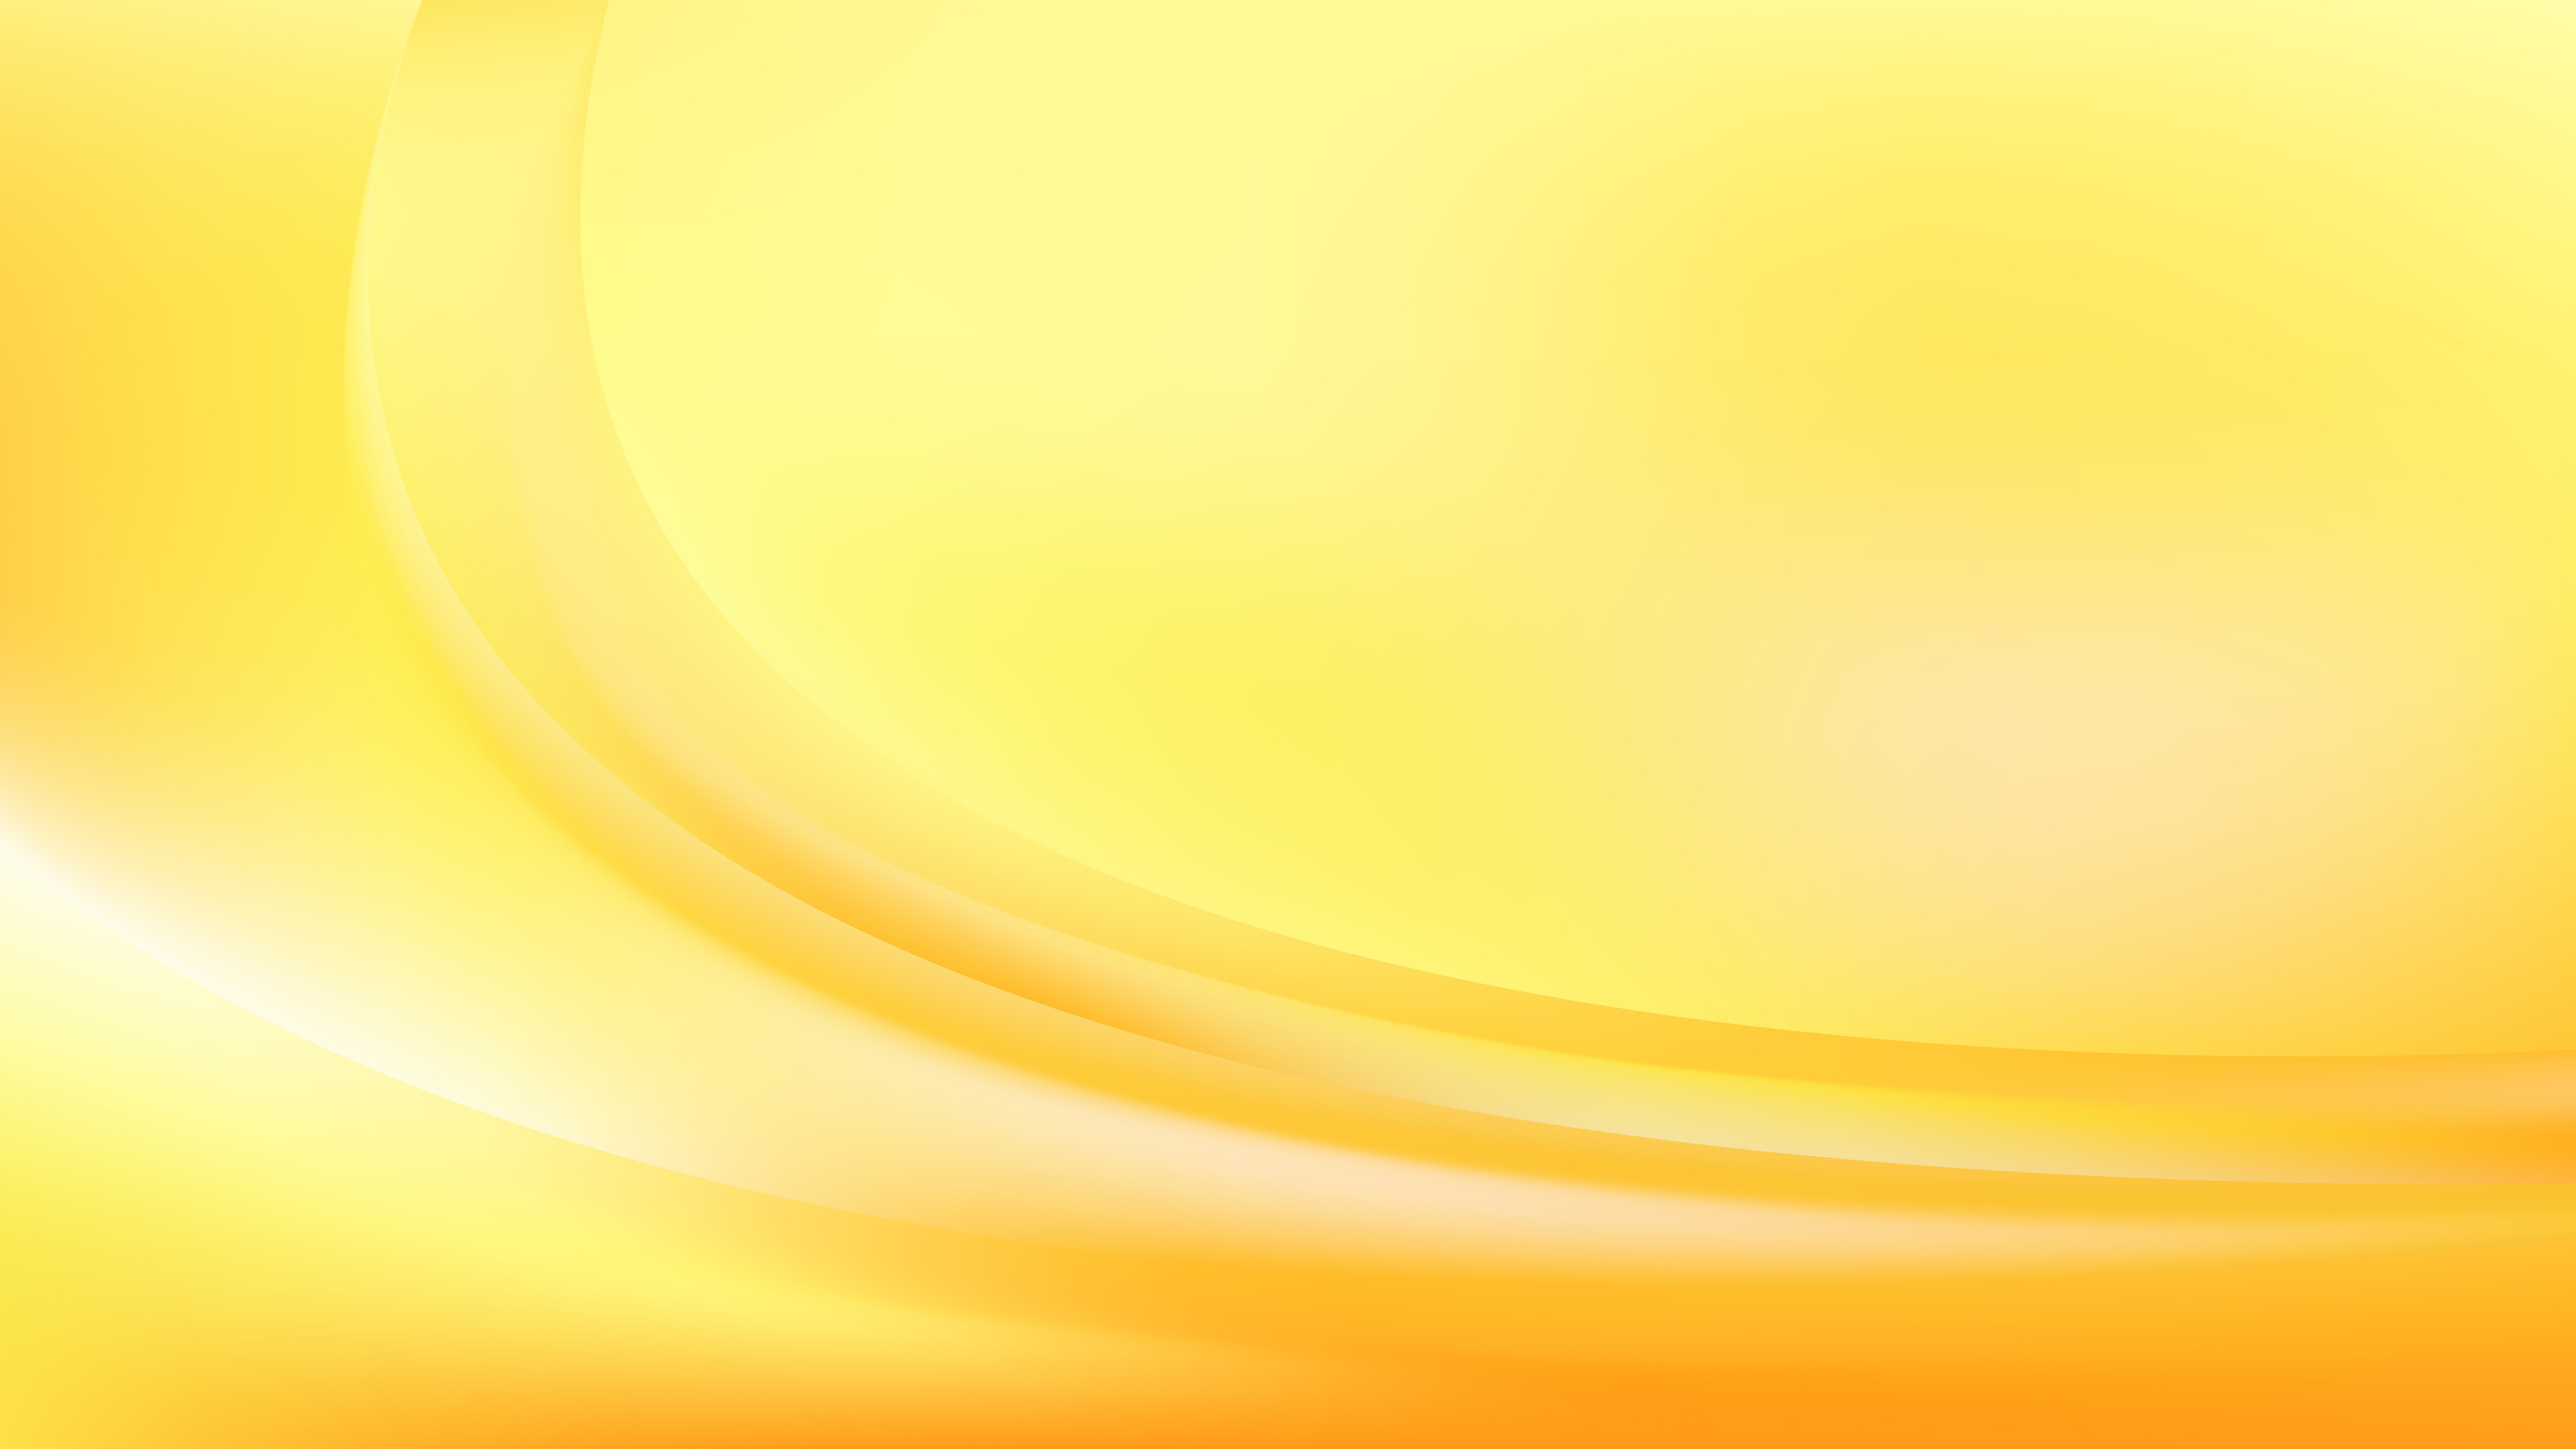 Free Abstract Orange and Yellow Wave Background